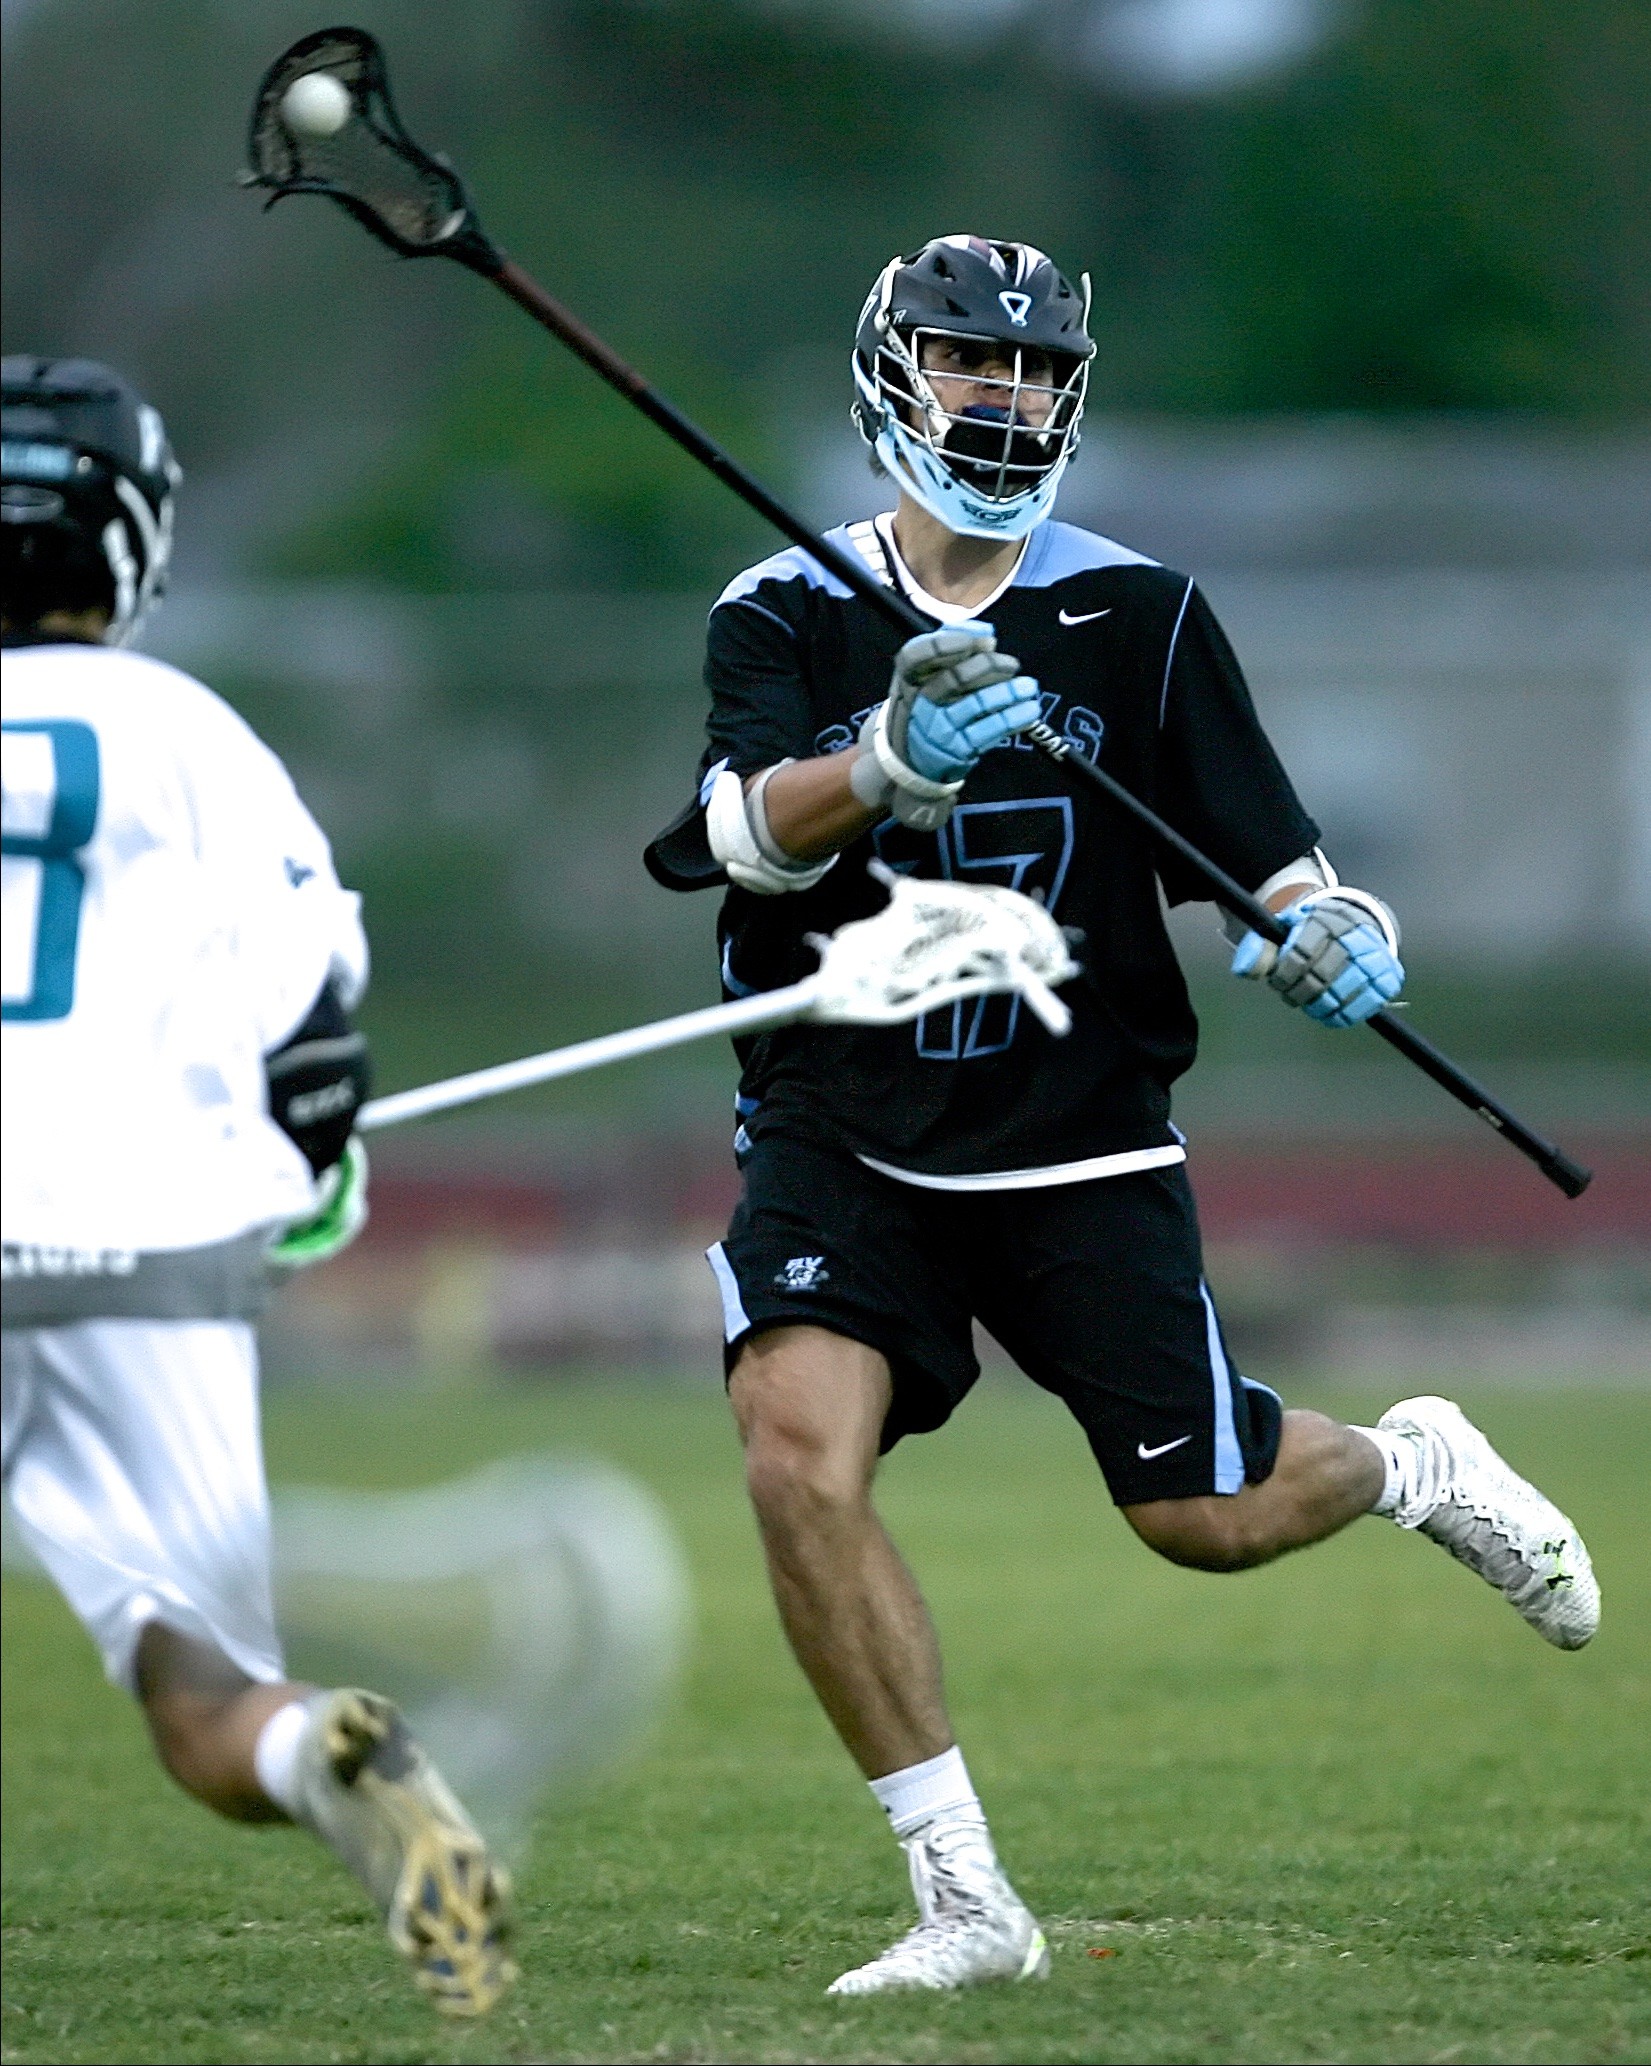 #17 Devin Naidoo looks to clear the ball for Ponte Vedra